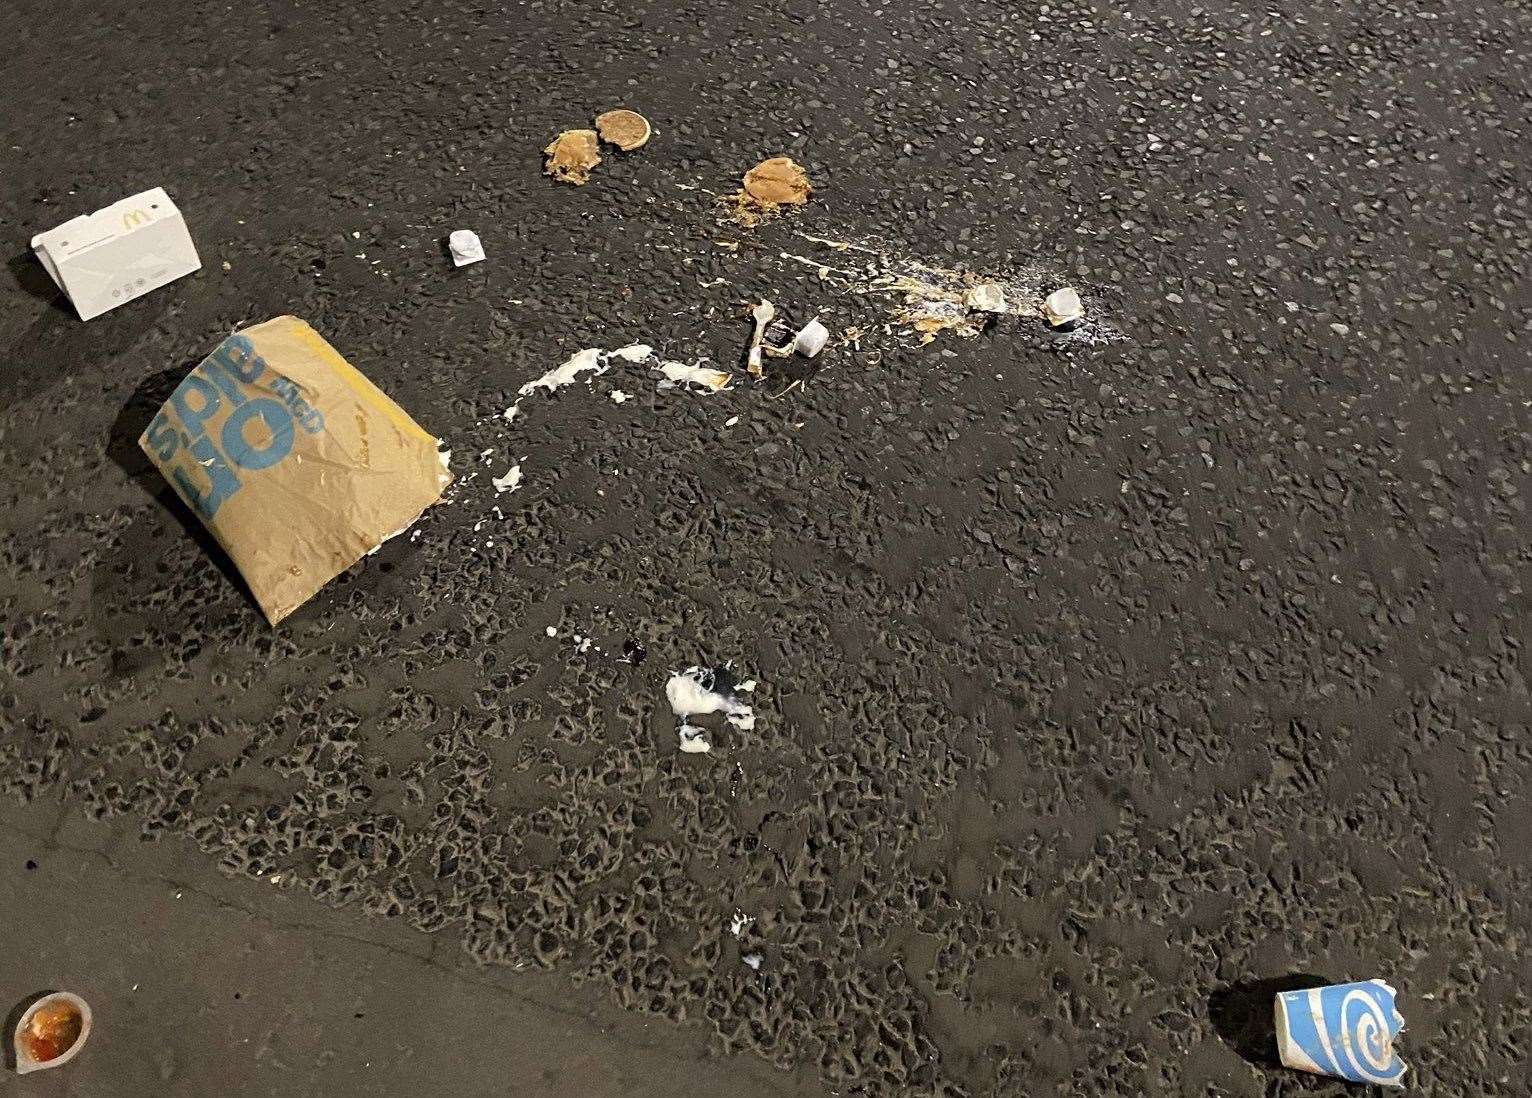 Many suspect people are eating the food they buy from drive-thrus then throw it from their car instead of bringing it home